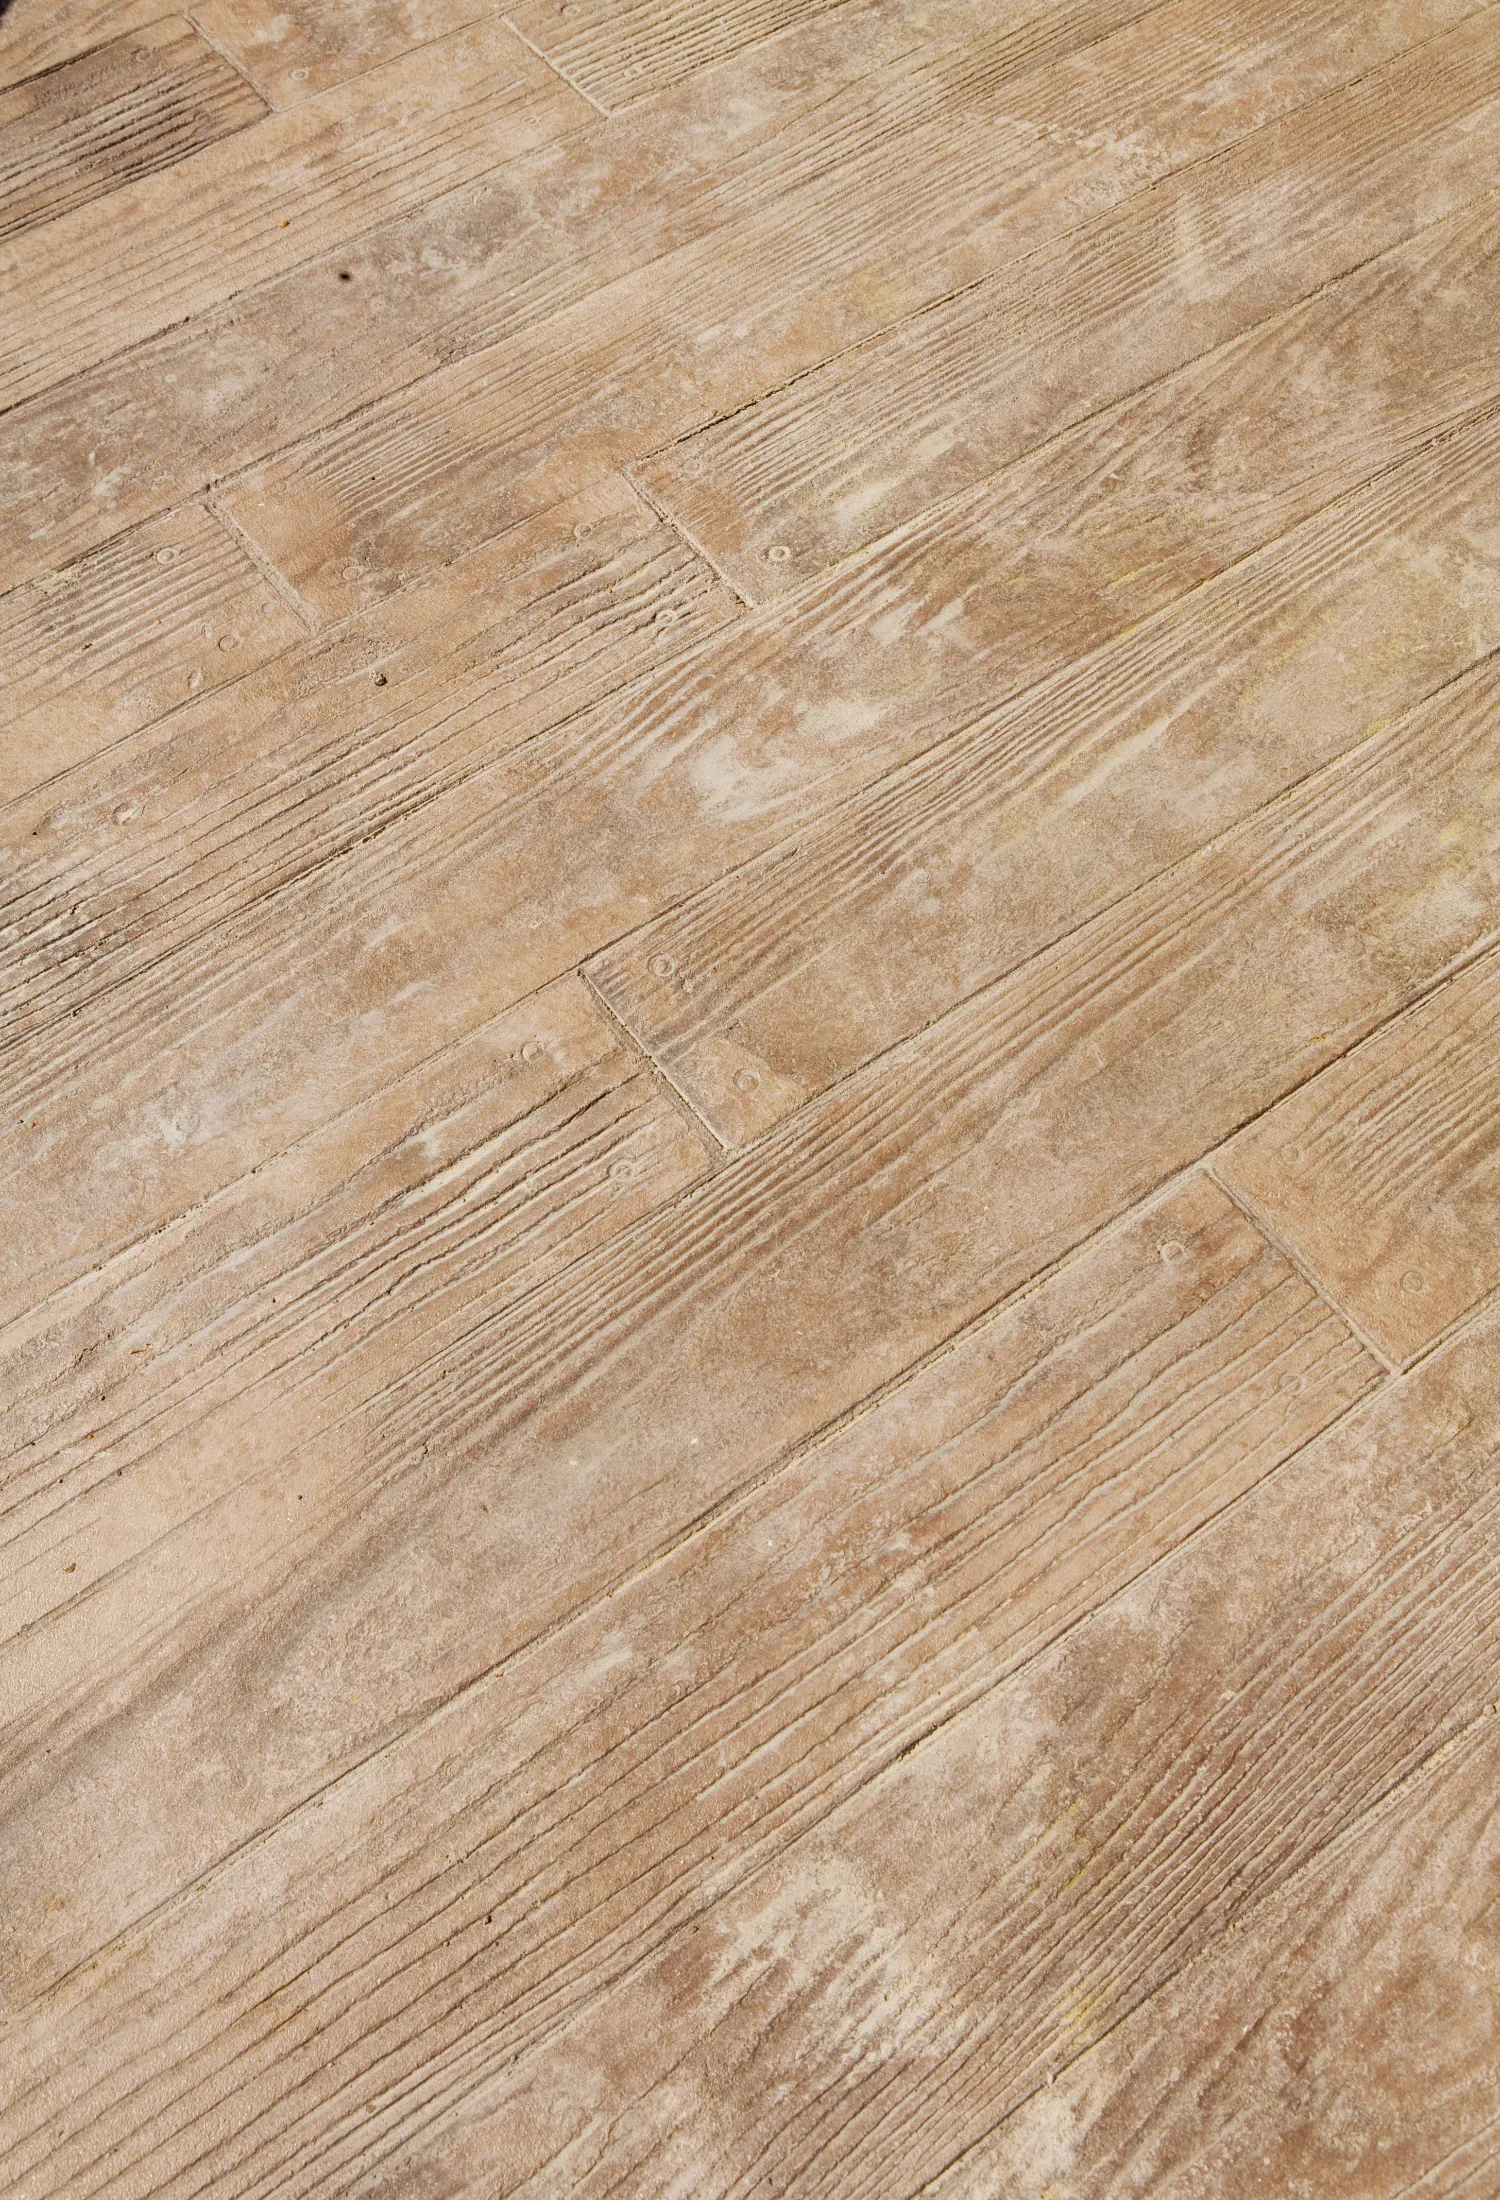 The image shows a close-up view of a wooden floor with a weathered, textured surface. The planks display a variety of natural wood grains and knots, with a slightly distressed and rustic appearance, giving the floor a vintage and well-worn look reminiscent of Sun Valley decorative concrete finishes.